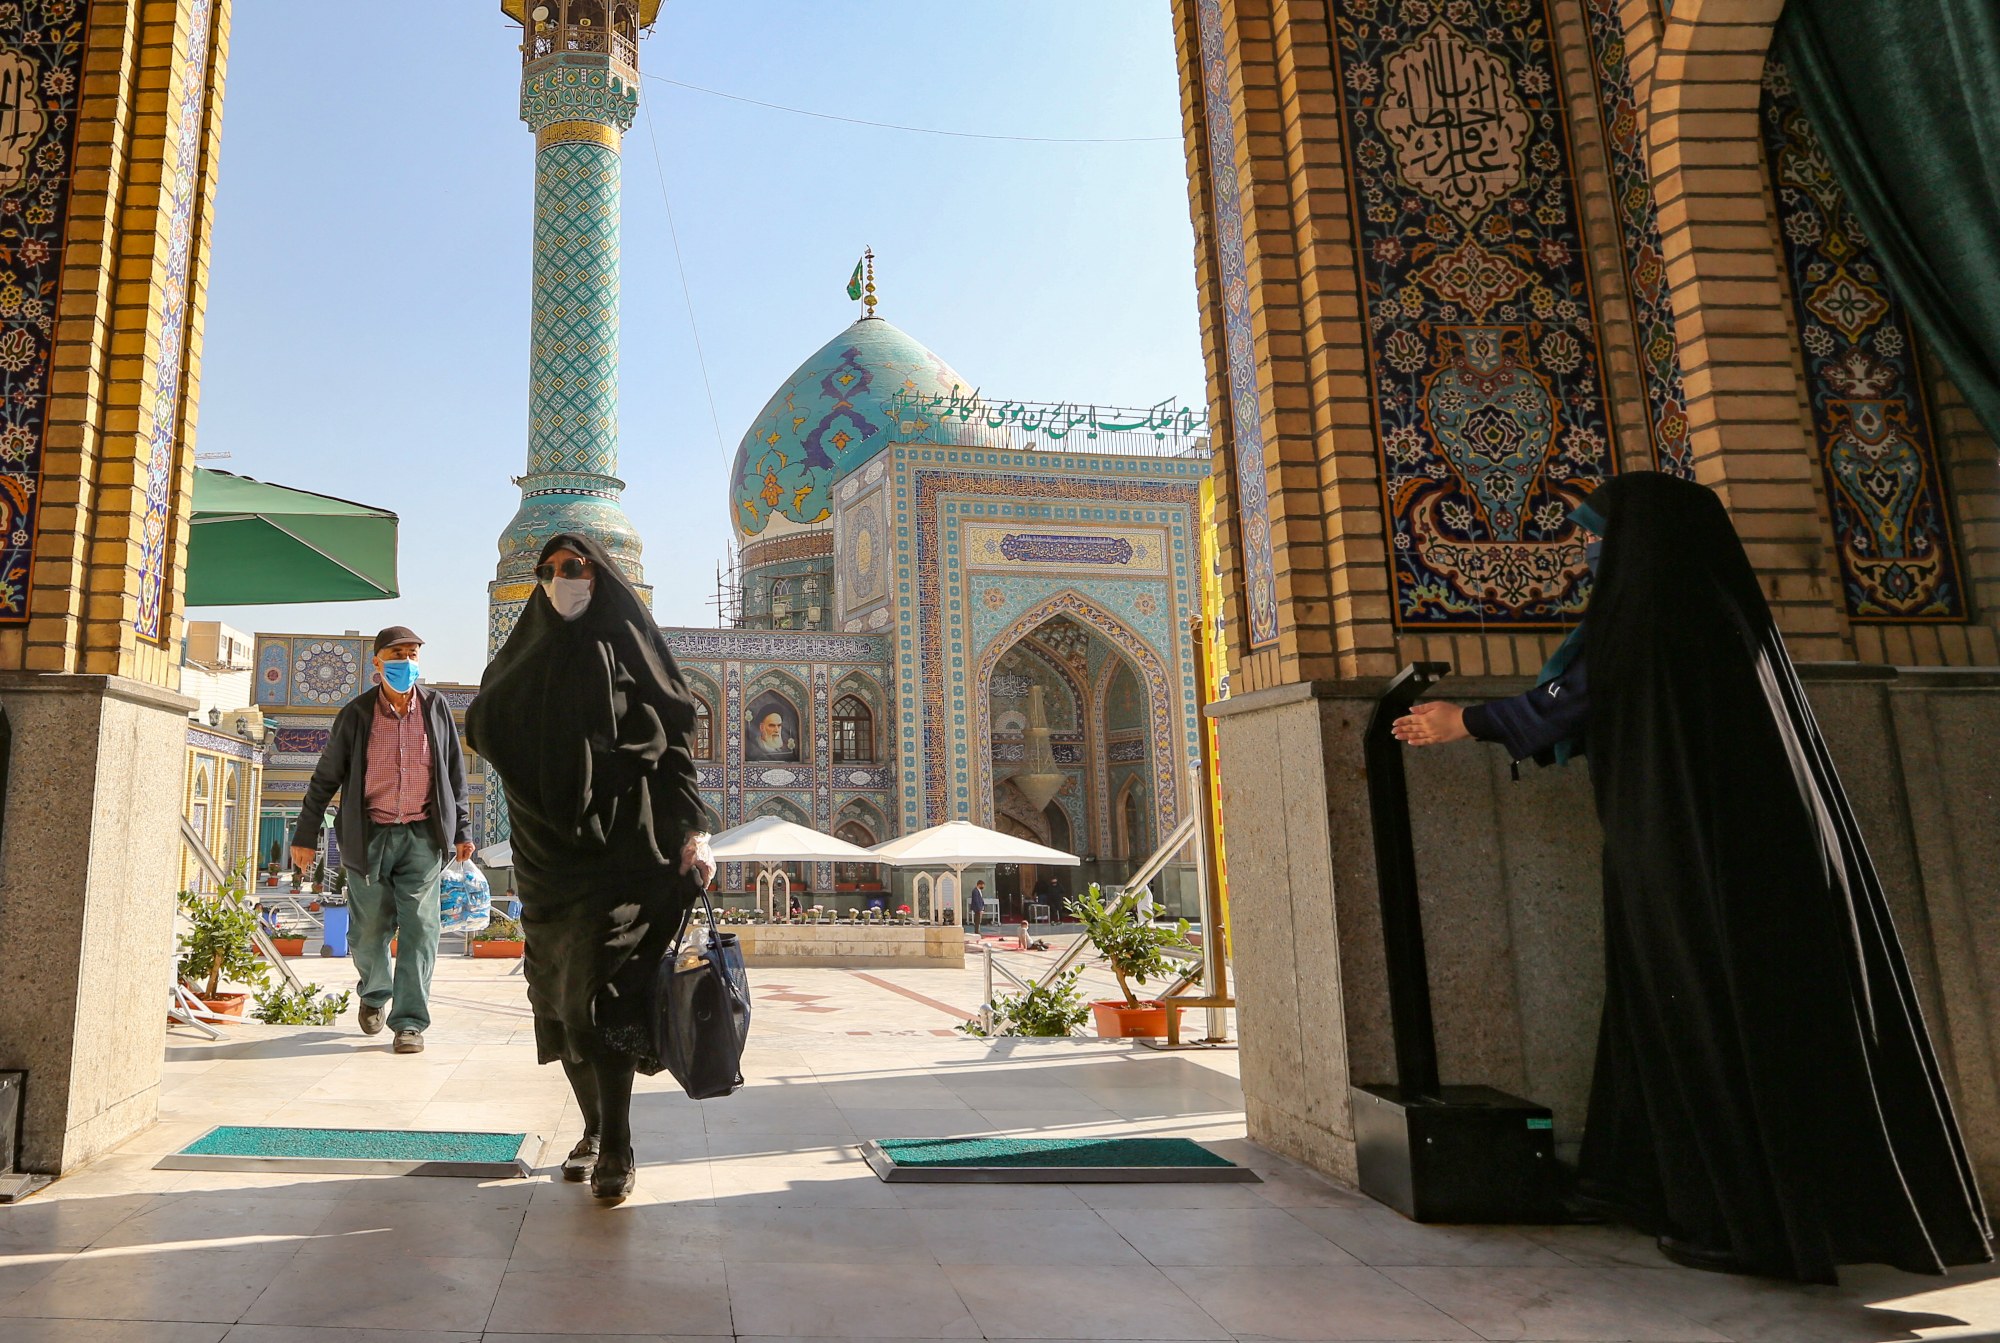 Mask-clad Iranians visit the Imamzadeh Saleh mosque in the capital Tehran on 1 November 2020 (AFP)